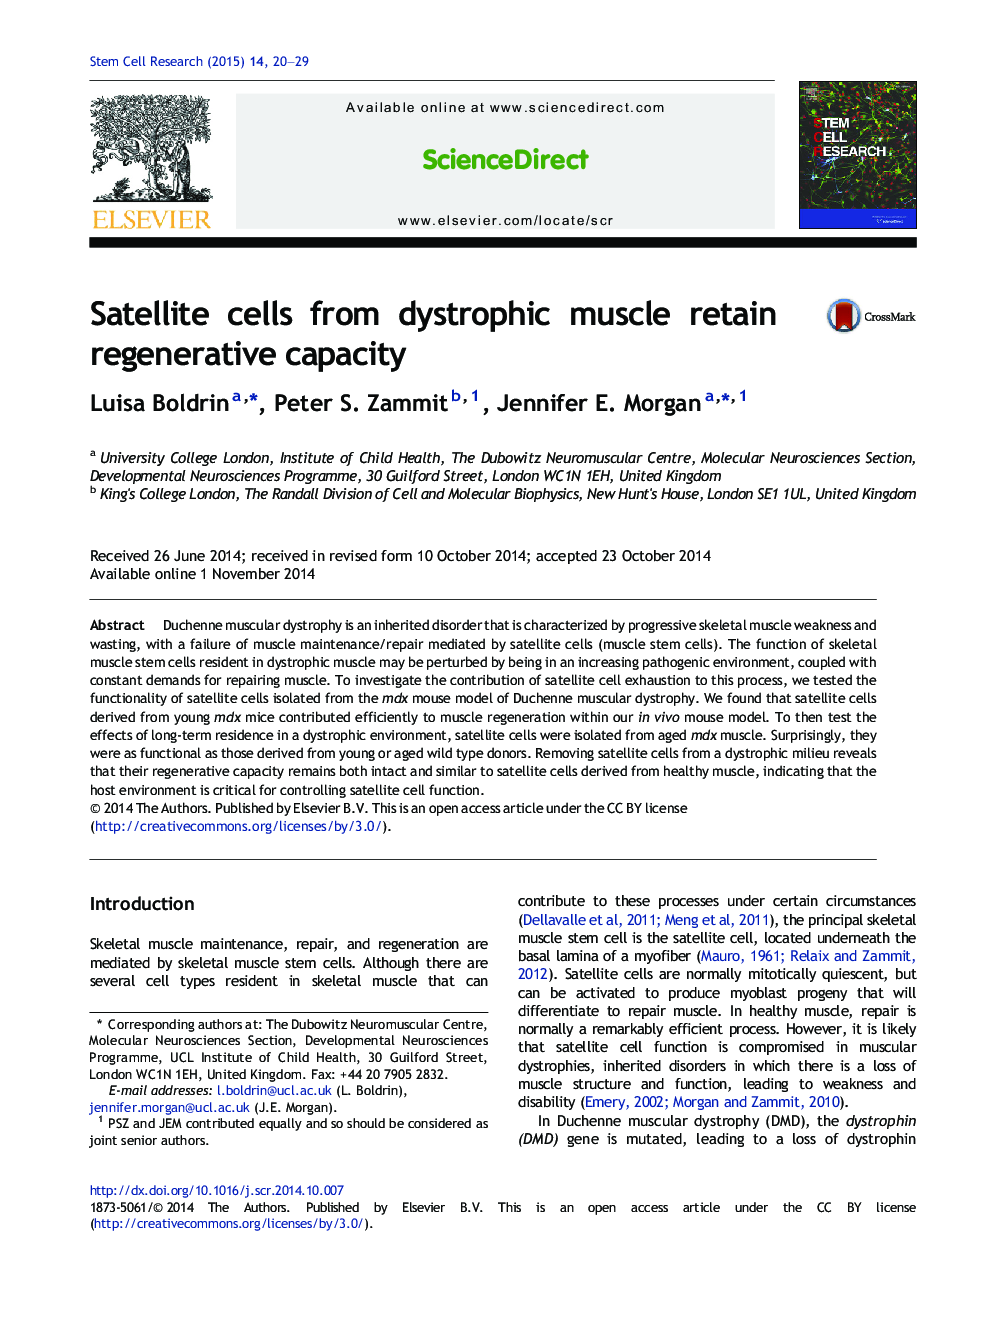 Satellite cells from dystrophic muscle retain regenerative capacity